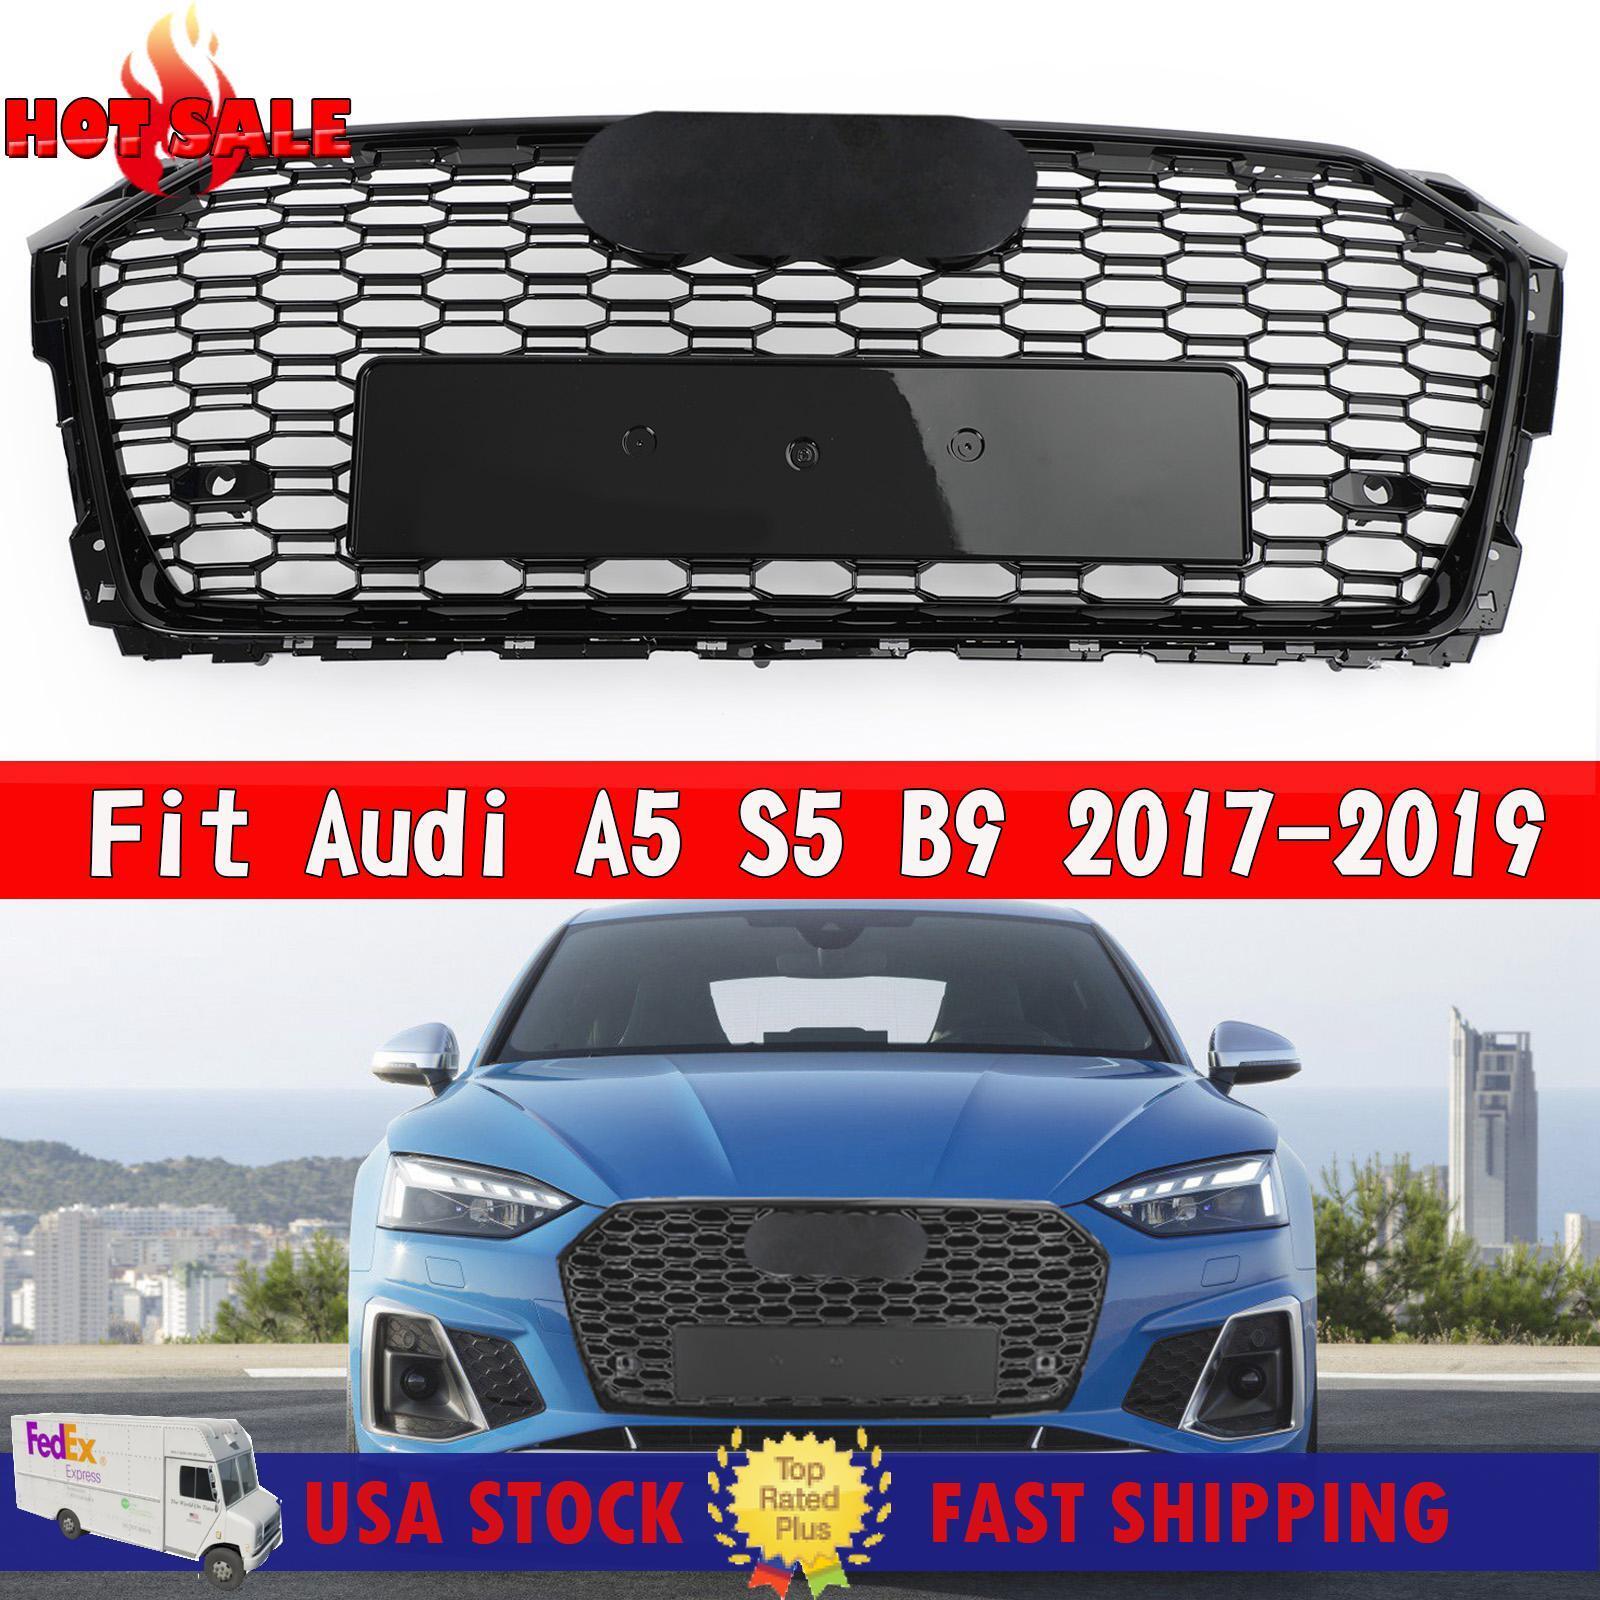 🔥FOR AUDI A5 S5 B9 2017-2019 FRONT BUMPER GRILLE HONEYCOMB HOOD GRILL RS5 STYLE